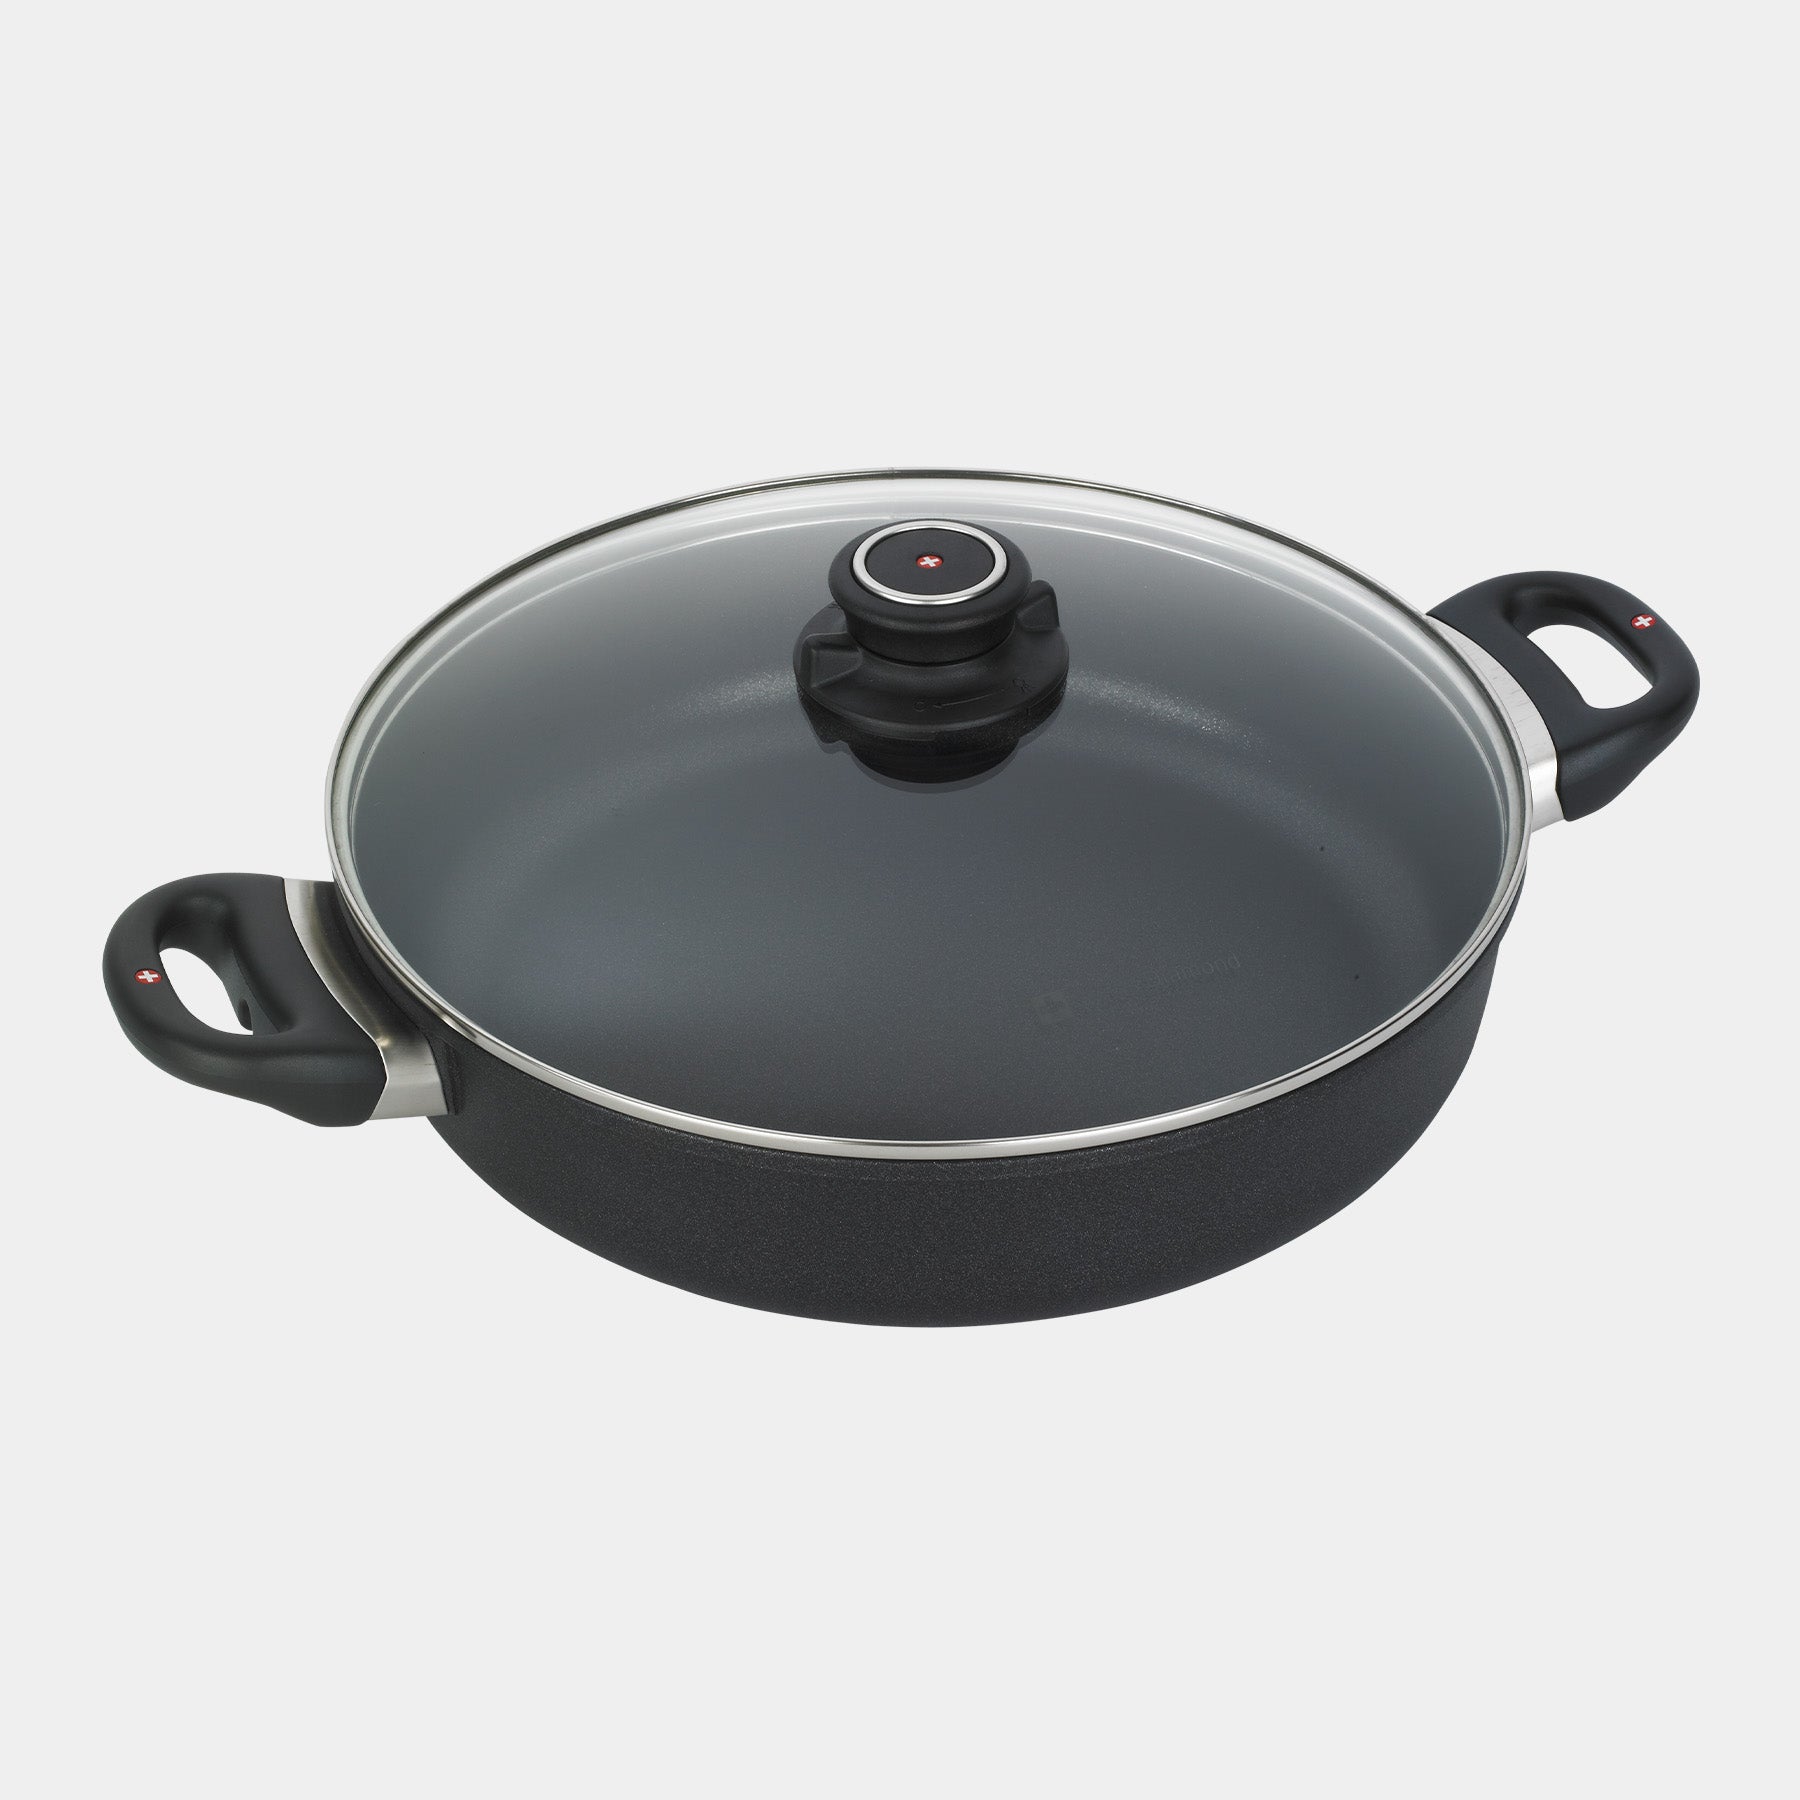 XD Nonstick 11" Sauteuse with Glass Lid